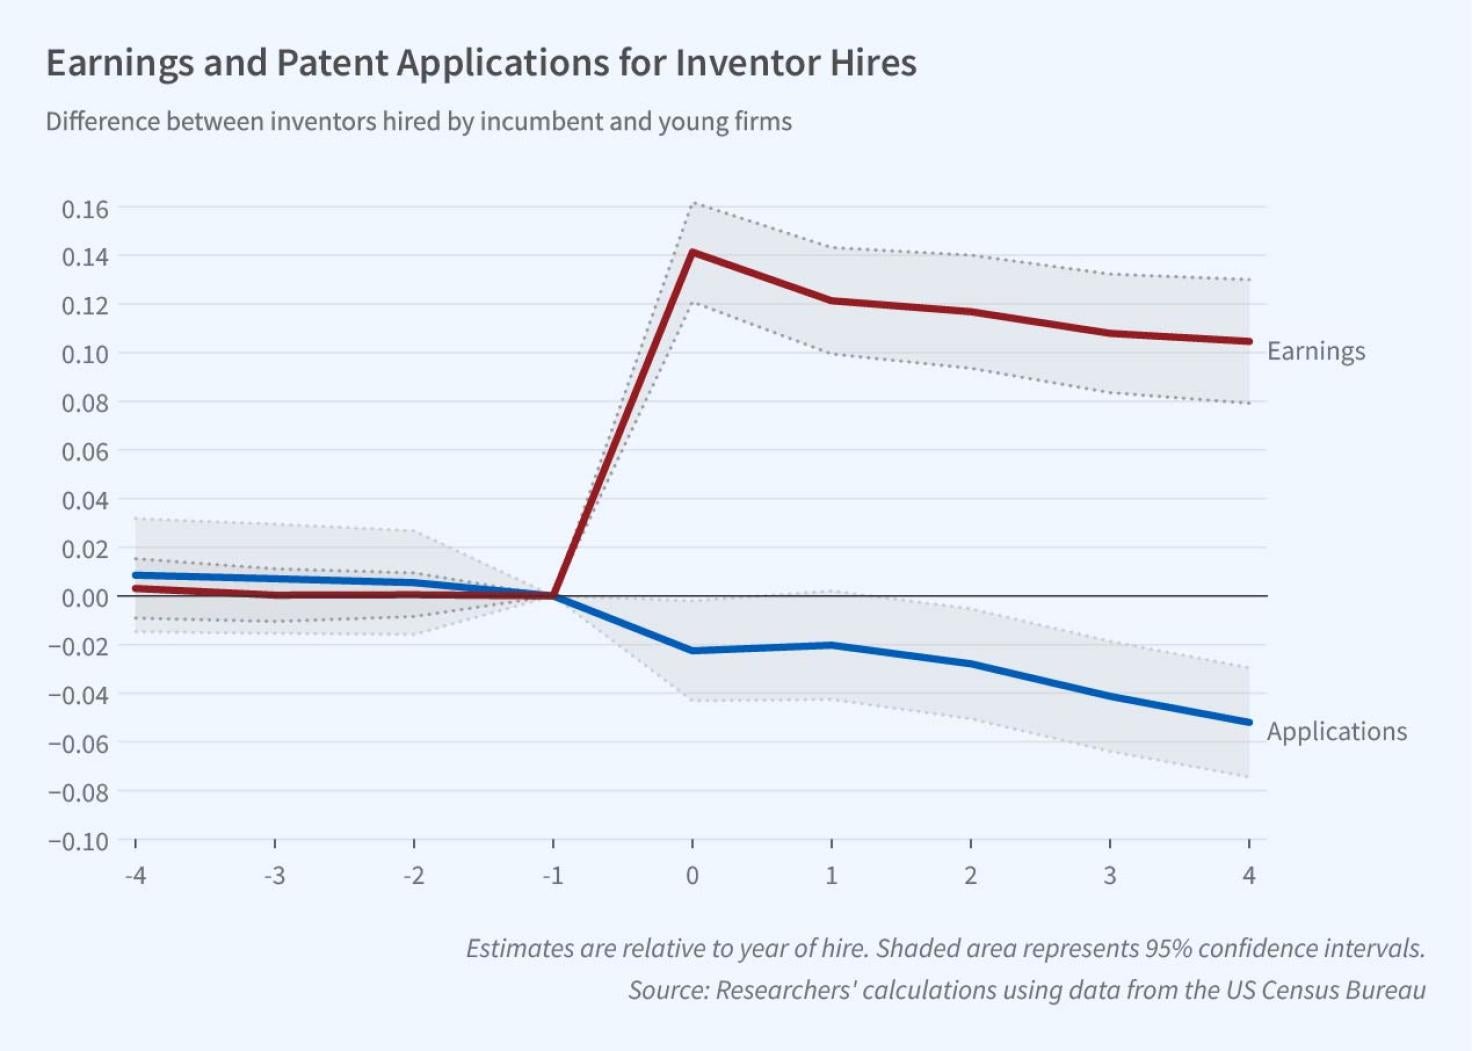 Where Have All the "Creative Talents" Gone? Employment Dynamics of US Inventors Figure